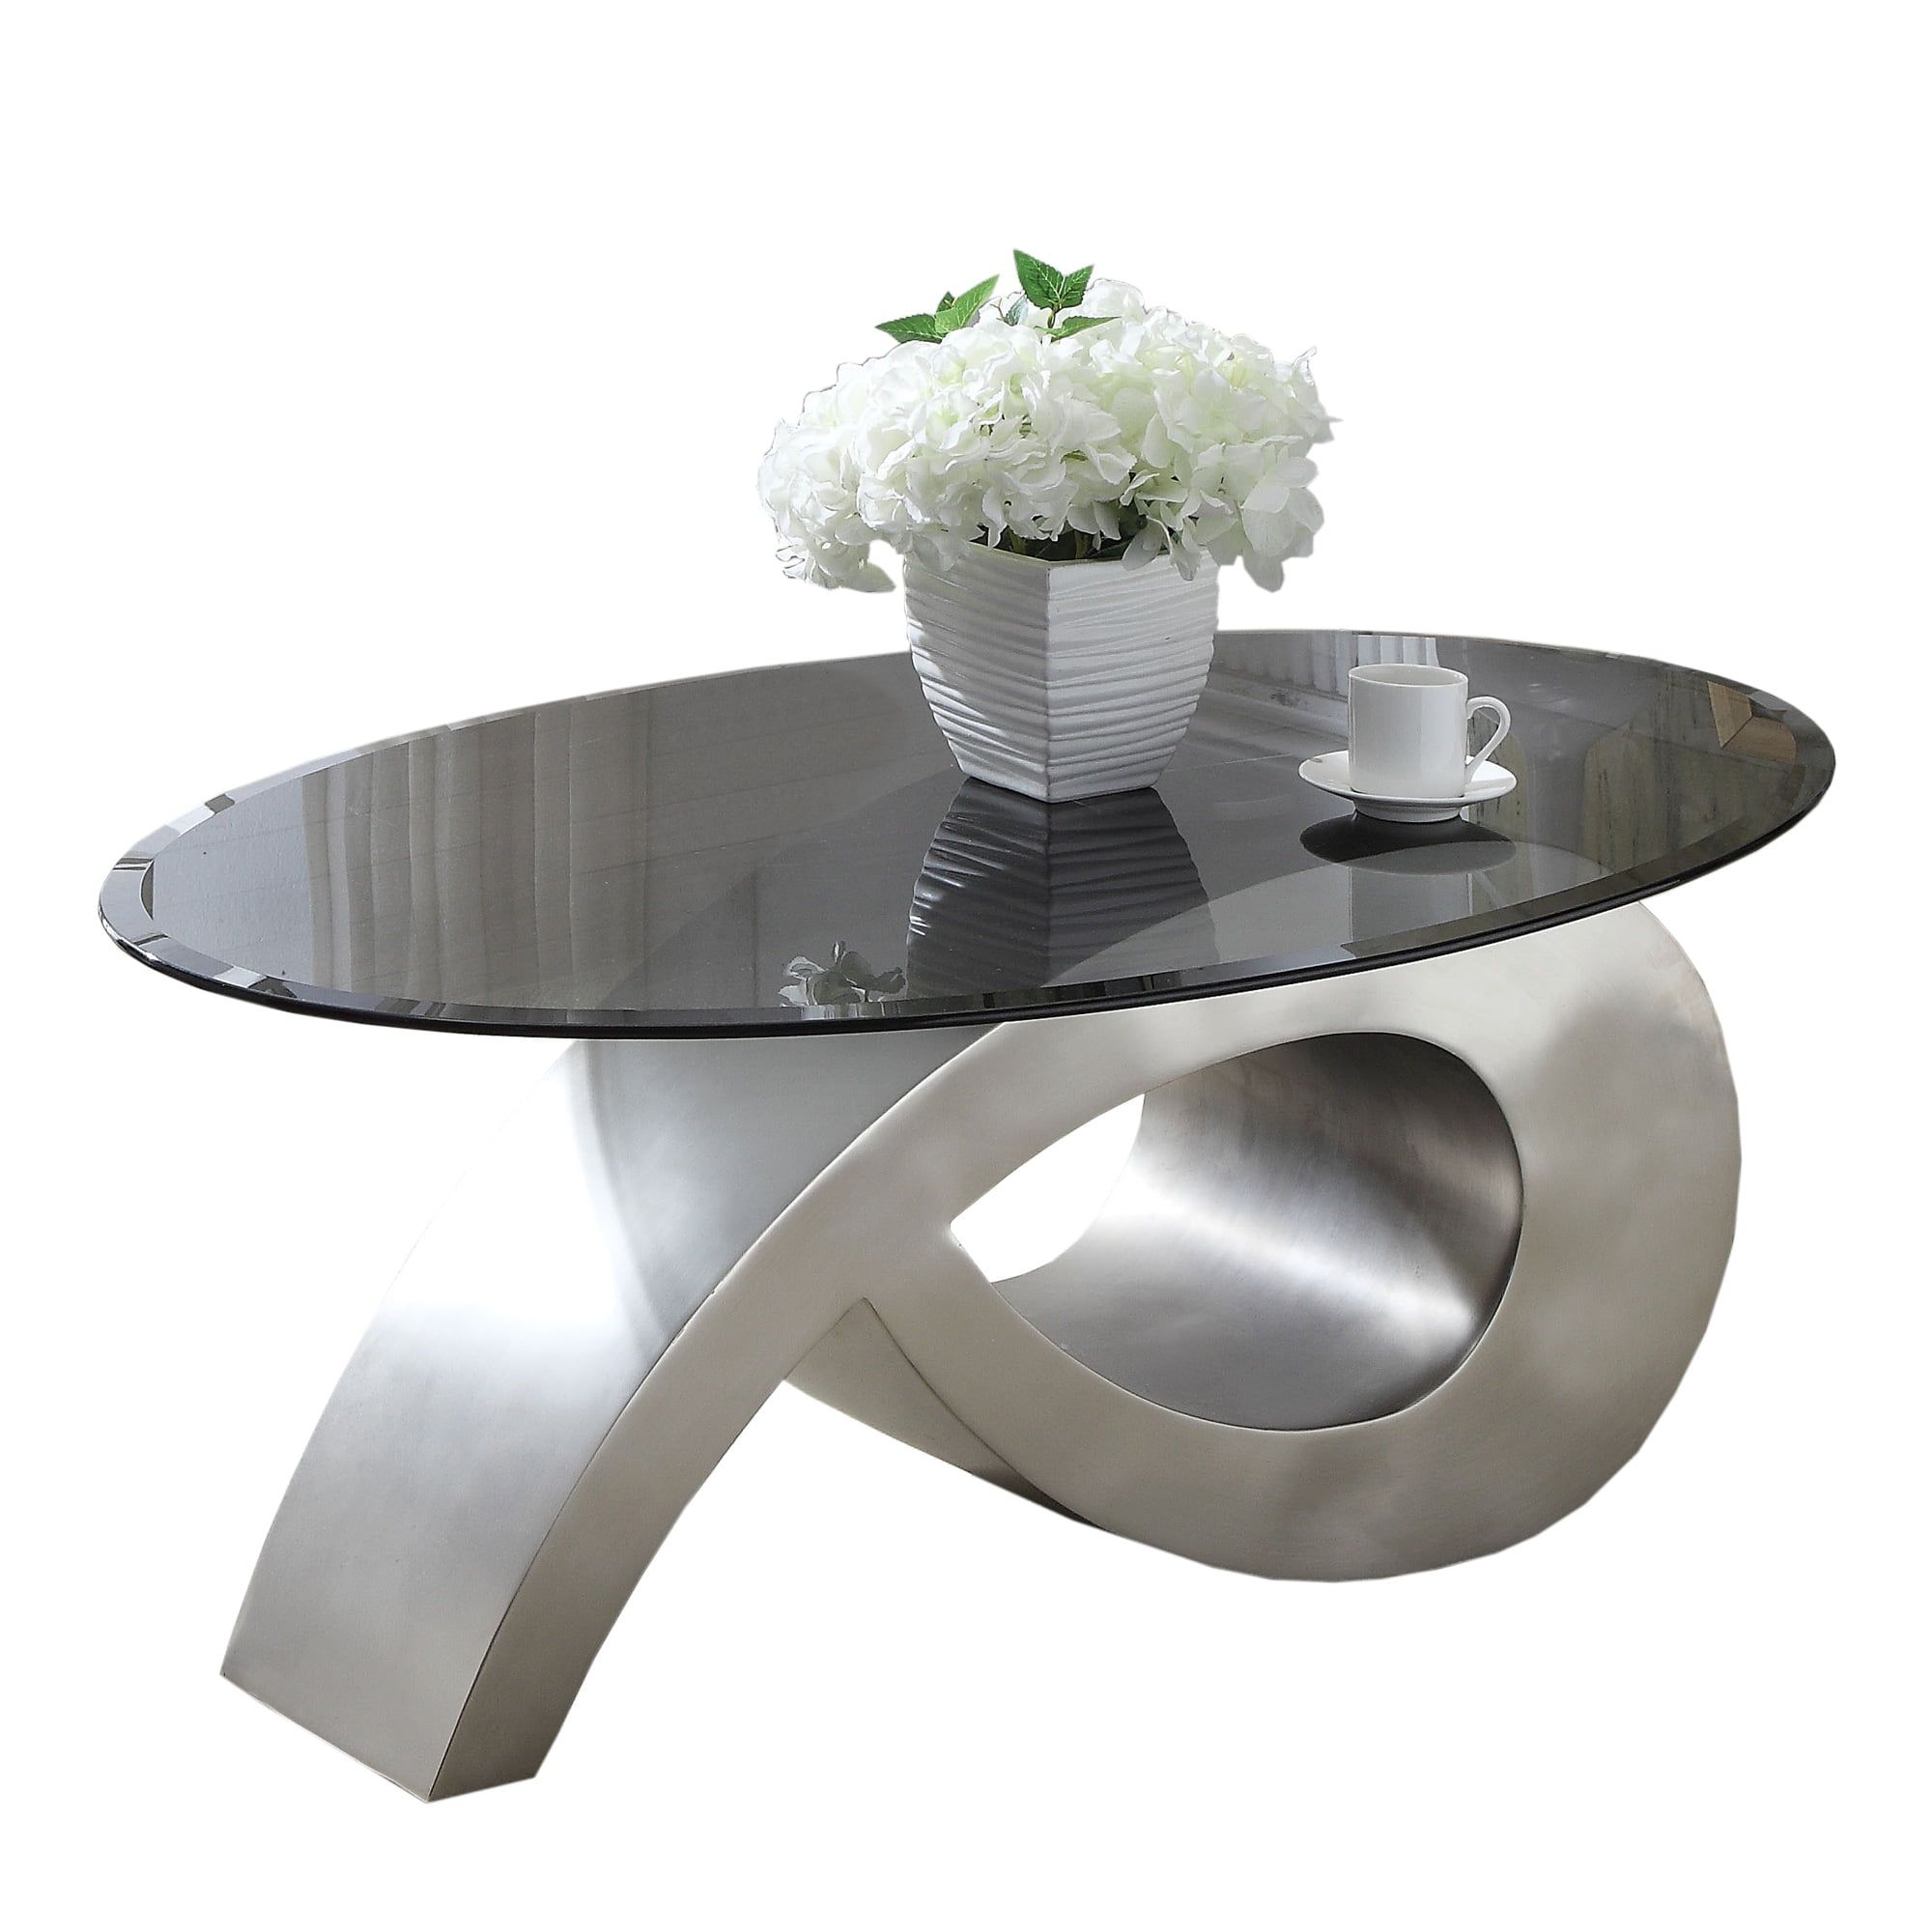 Oval Glass Coffee Table With Unique Metal Base, Black And Silver Intended For Oval Glass Coffee Tables (View 11 of 20)